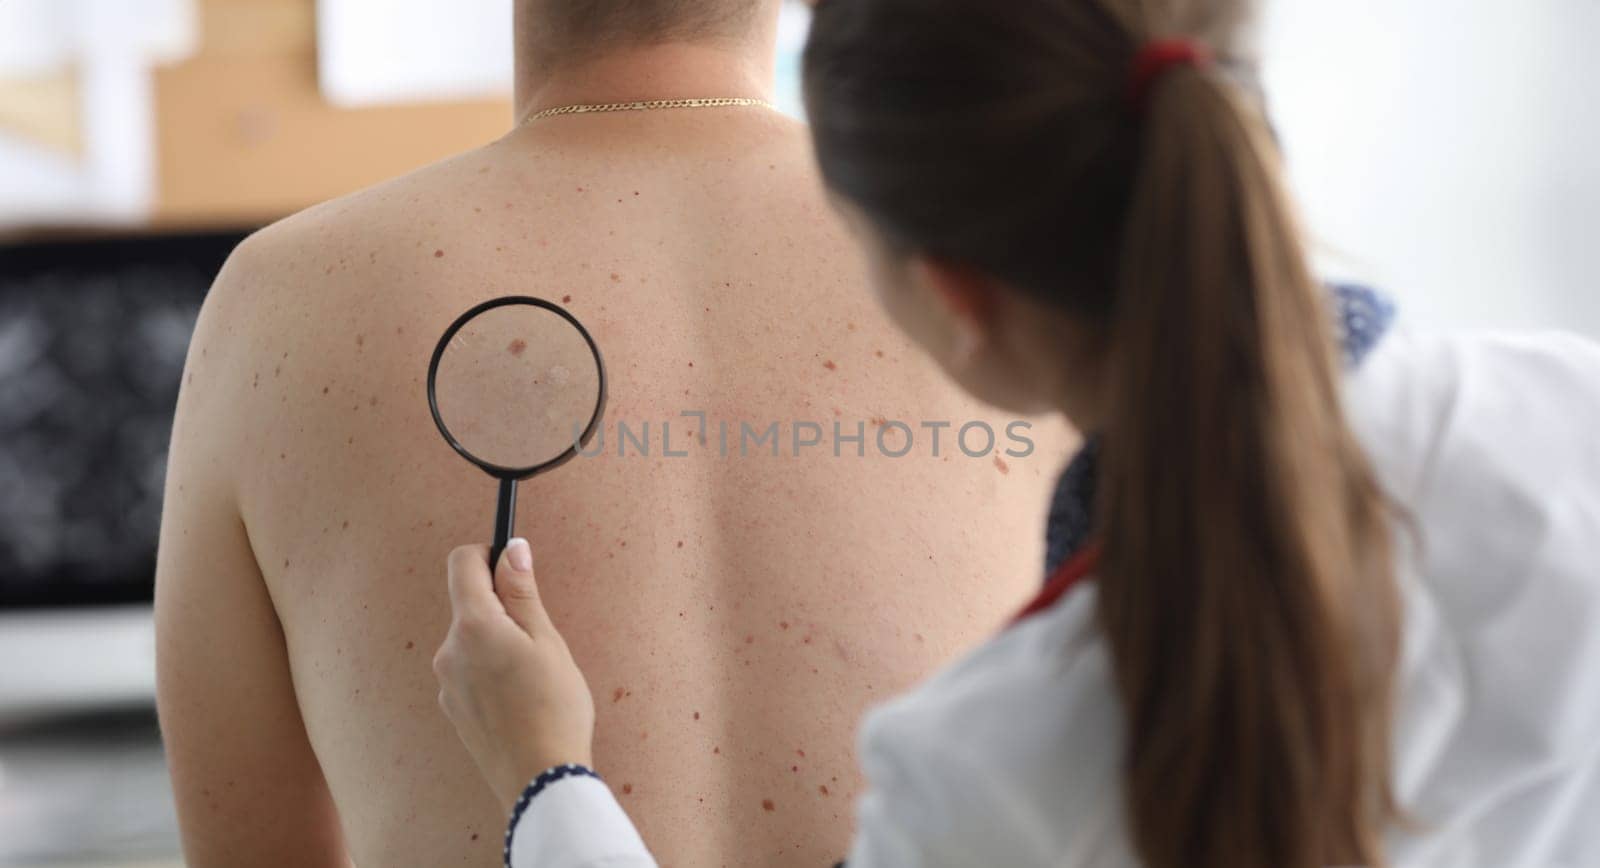 Oncologist holds magnifying glass in hand and examines pigmented nevi on patient's back in clinic by kuprevich